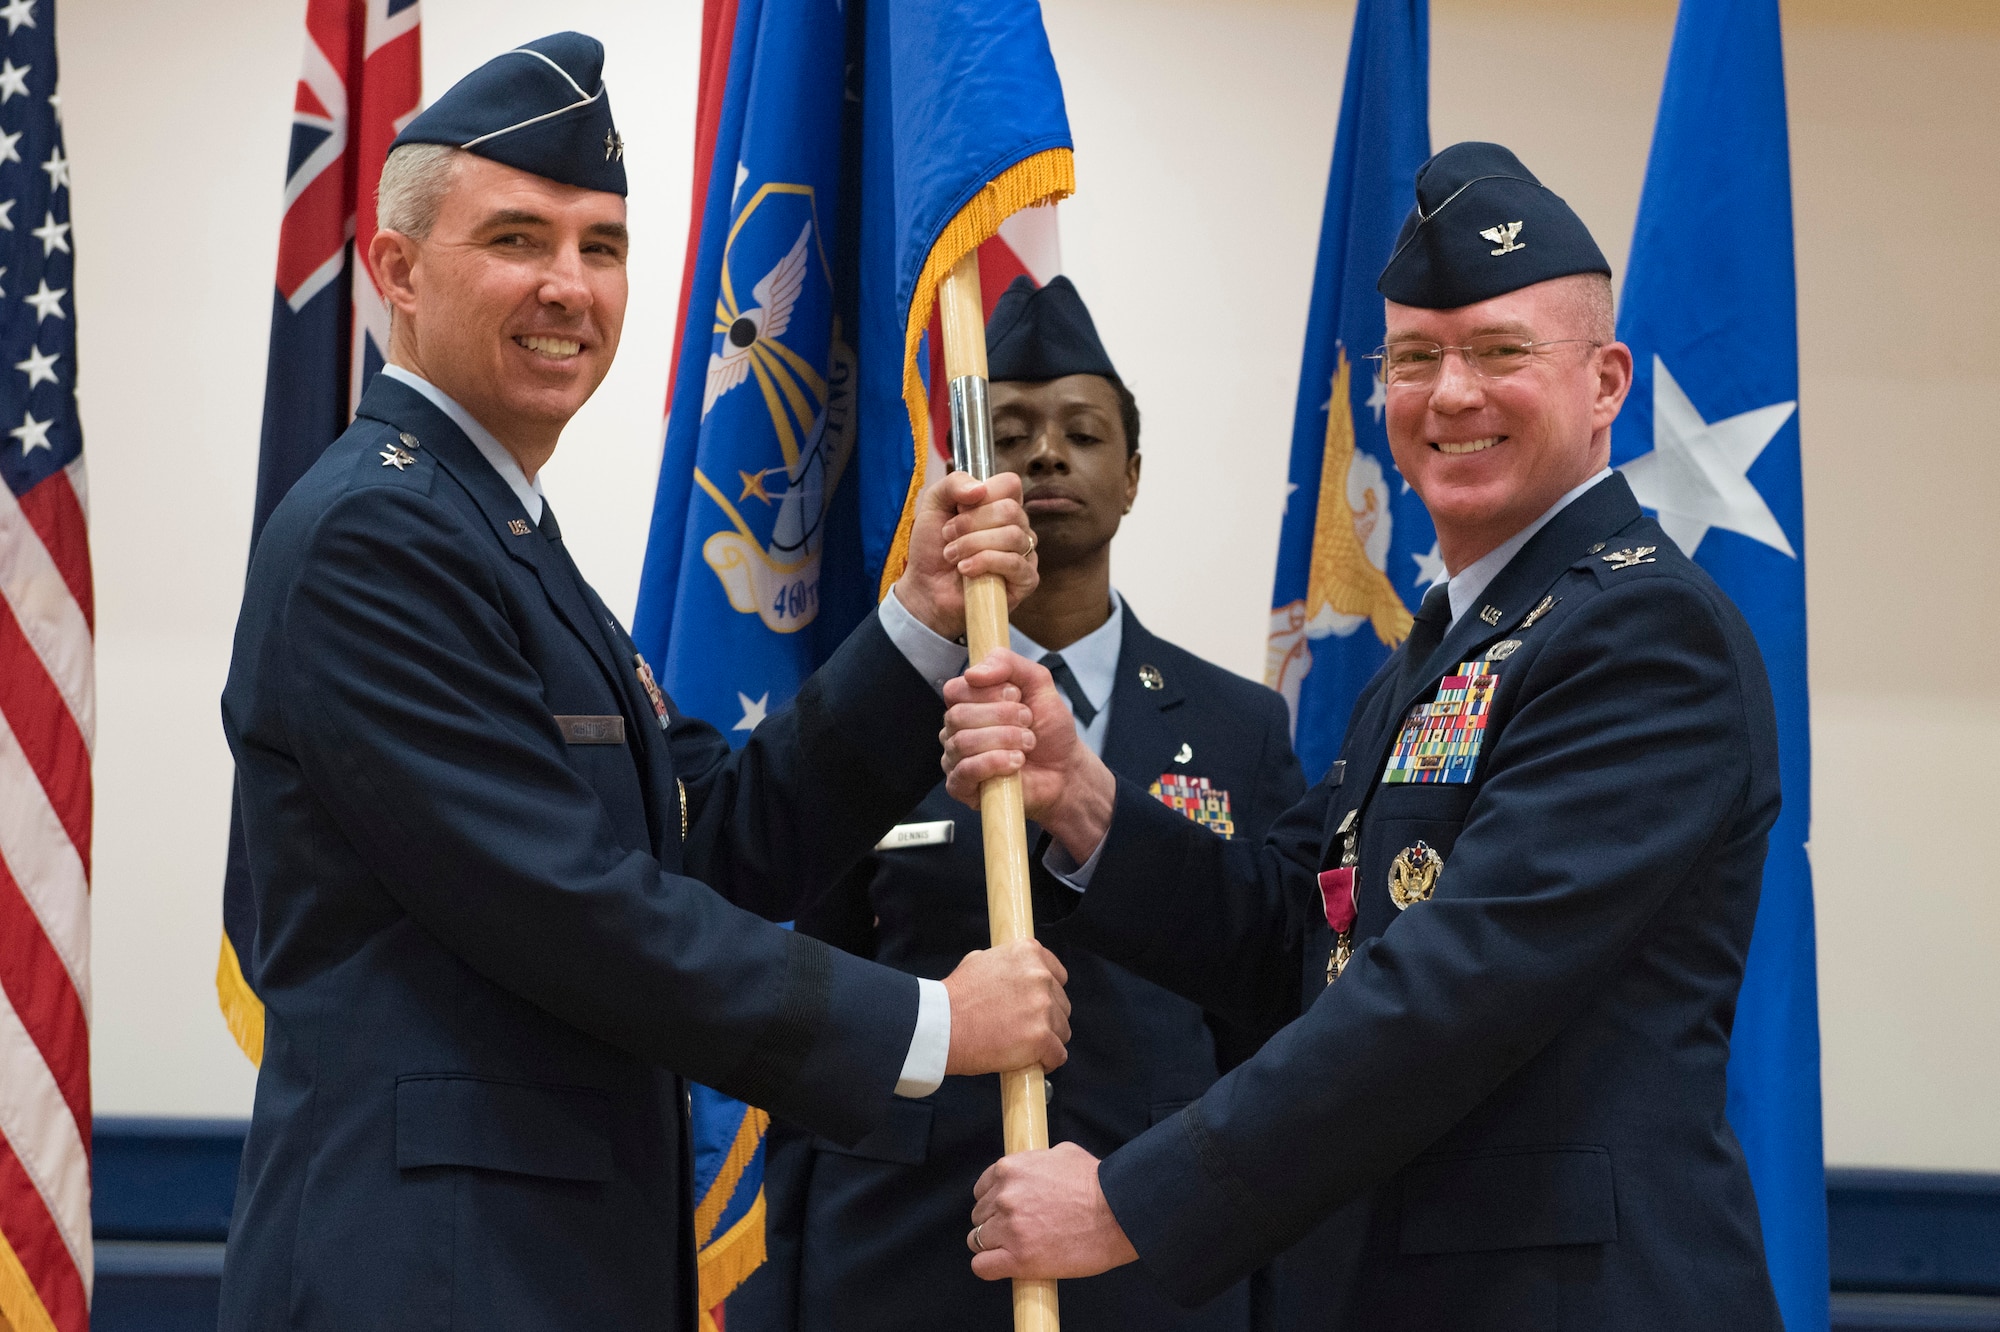 Maj. Gen. Stephen Whiting, 14th Air Force commander, receives the guidon from Col. Troy Endicott, 460th Space Wing outgoing commander, during a change of command ceremony May 3, 2019, on Buckley Air Force Base, Colorado.